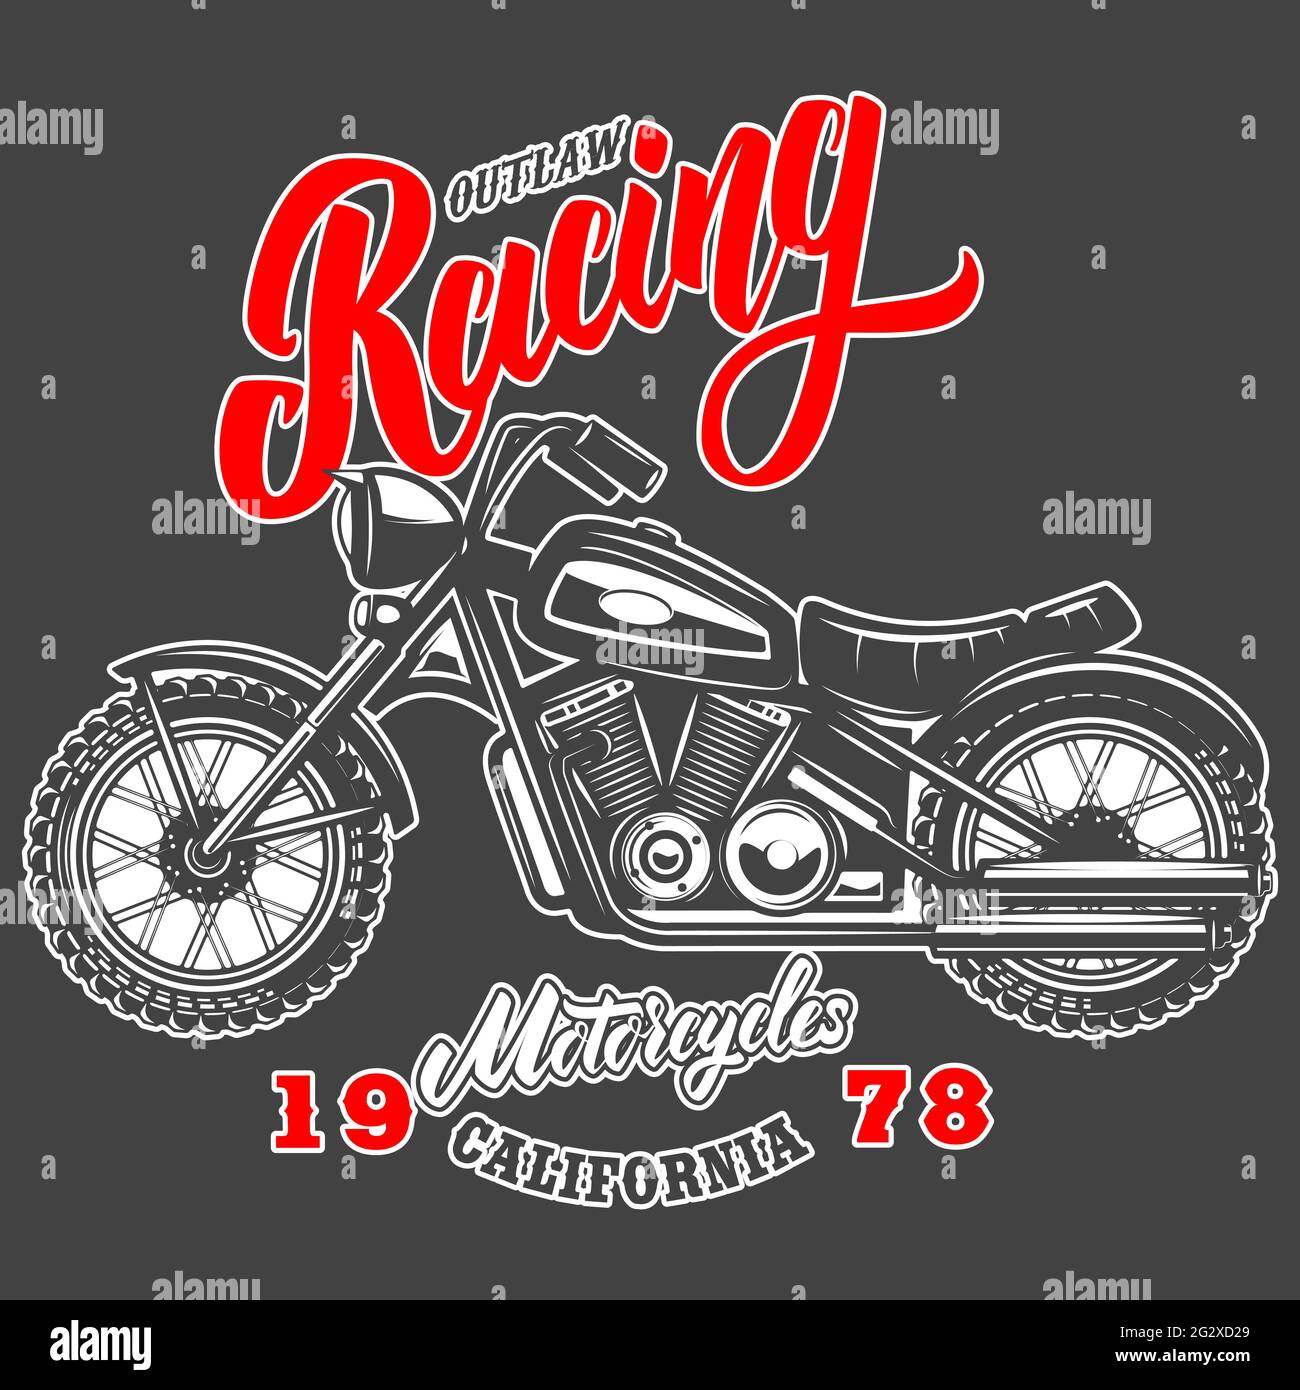 Outlaw racing. Emblem template with old style motorcycle. Design element for logo, label, sign, emblem, poster. Vector illustration Stock Vector